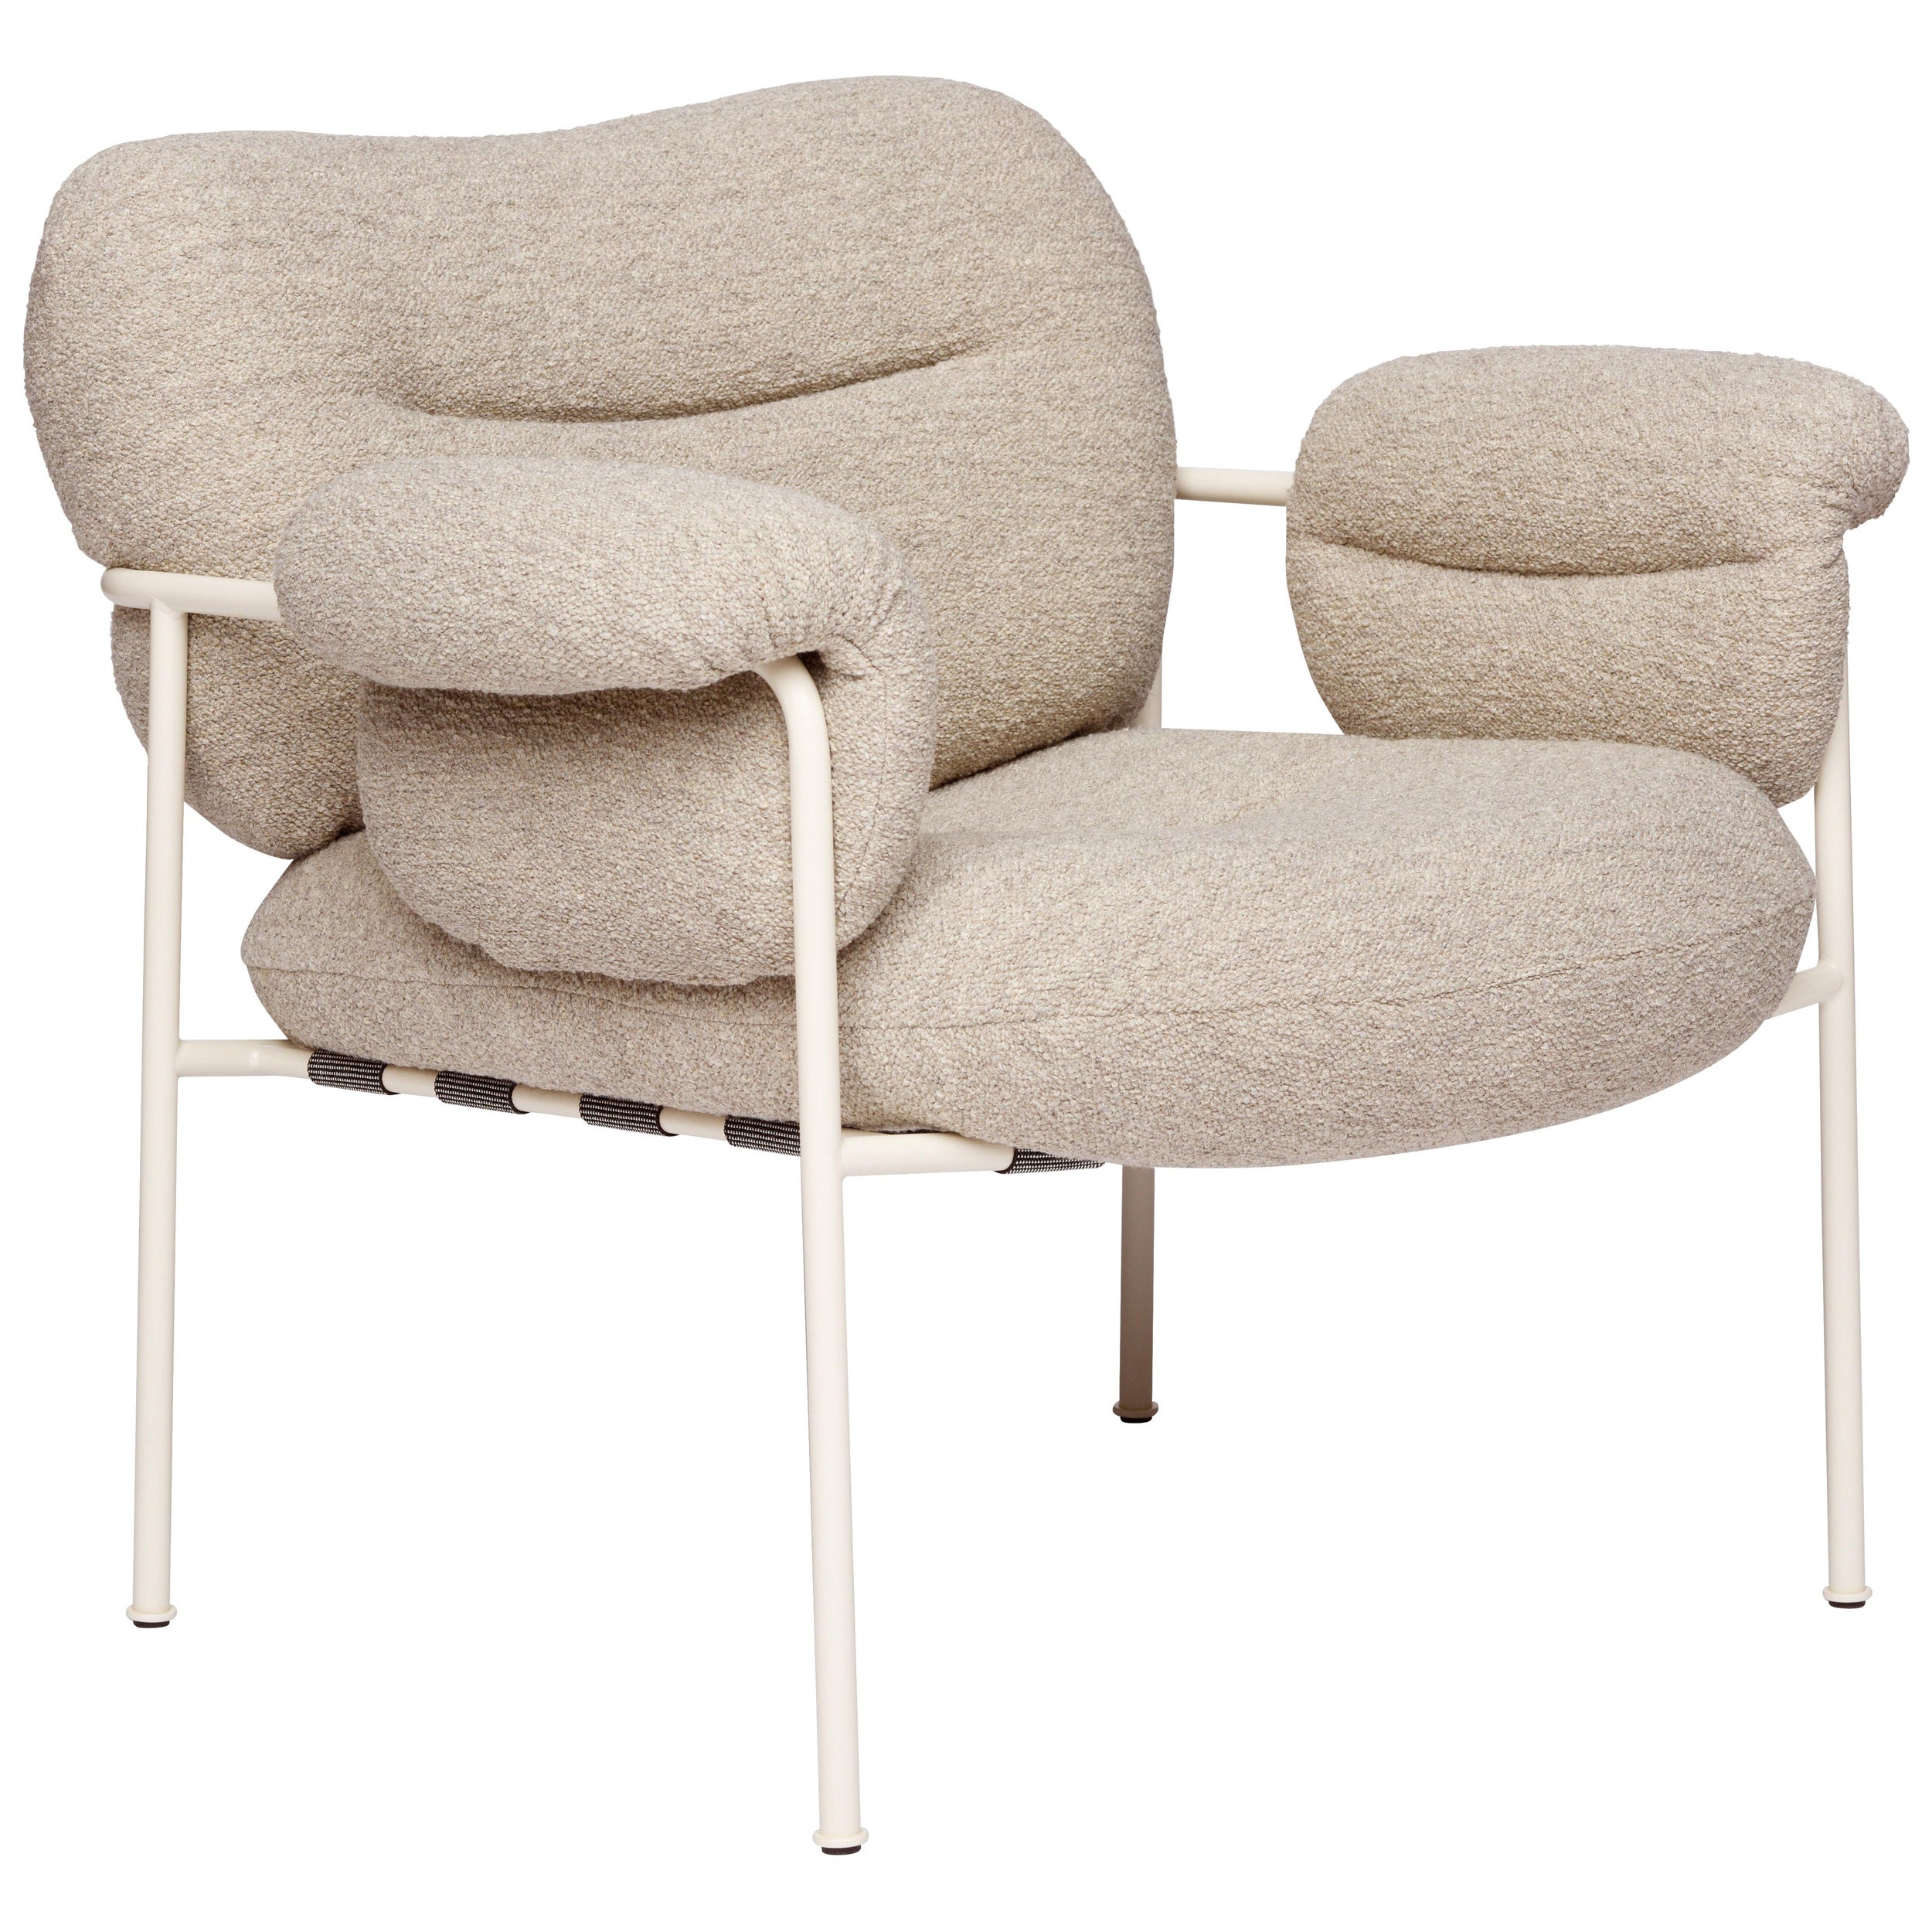 Bollo Armchair by Fogia, Barnum Sand 02, White Steel For Sale